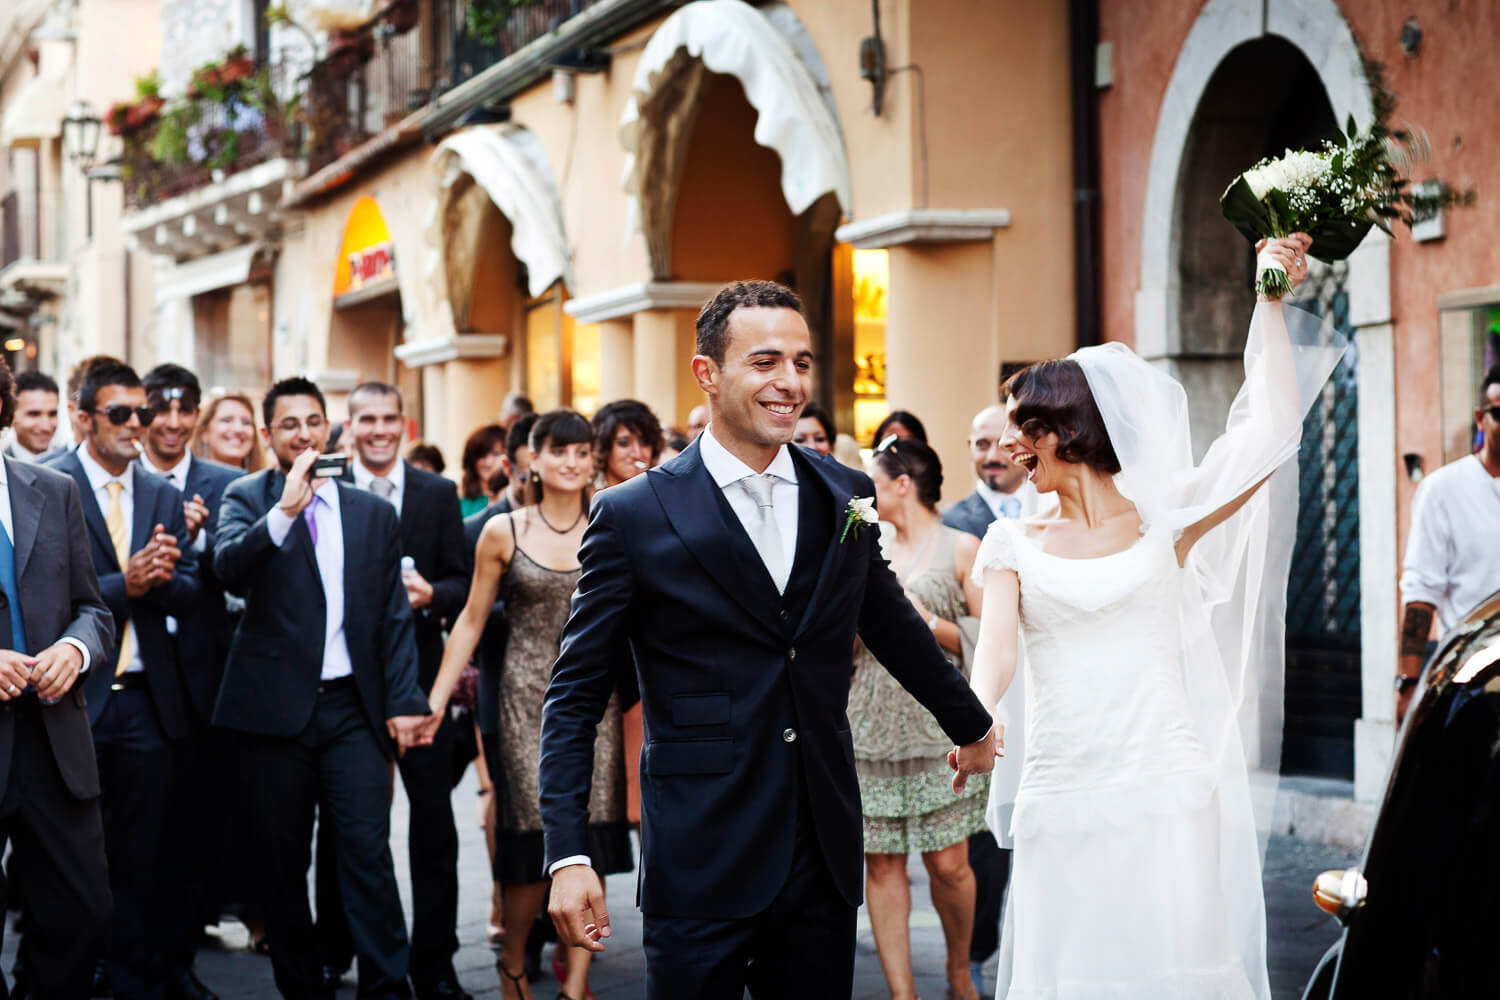 Taormina Sicily Wedding Venue pic by Best Photographer for reportage in Italy